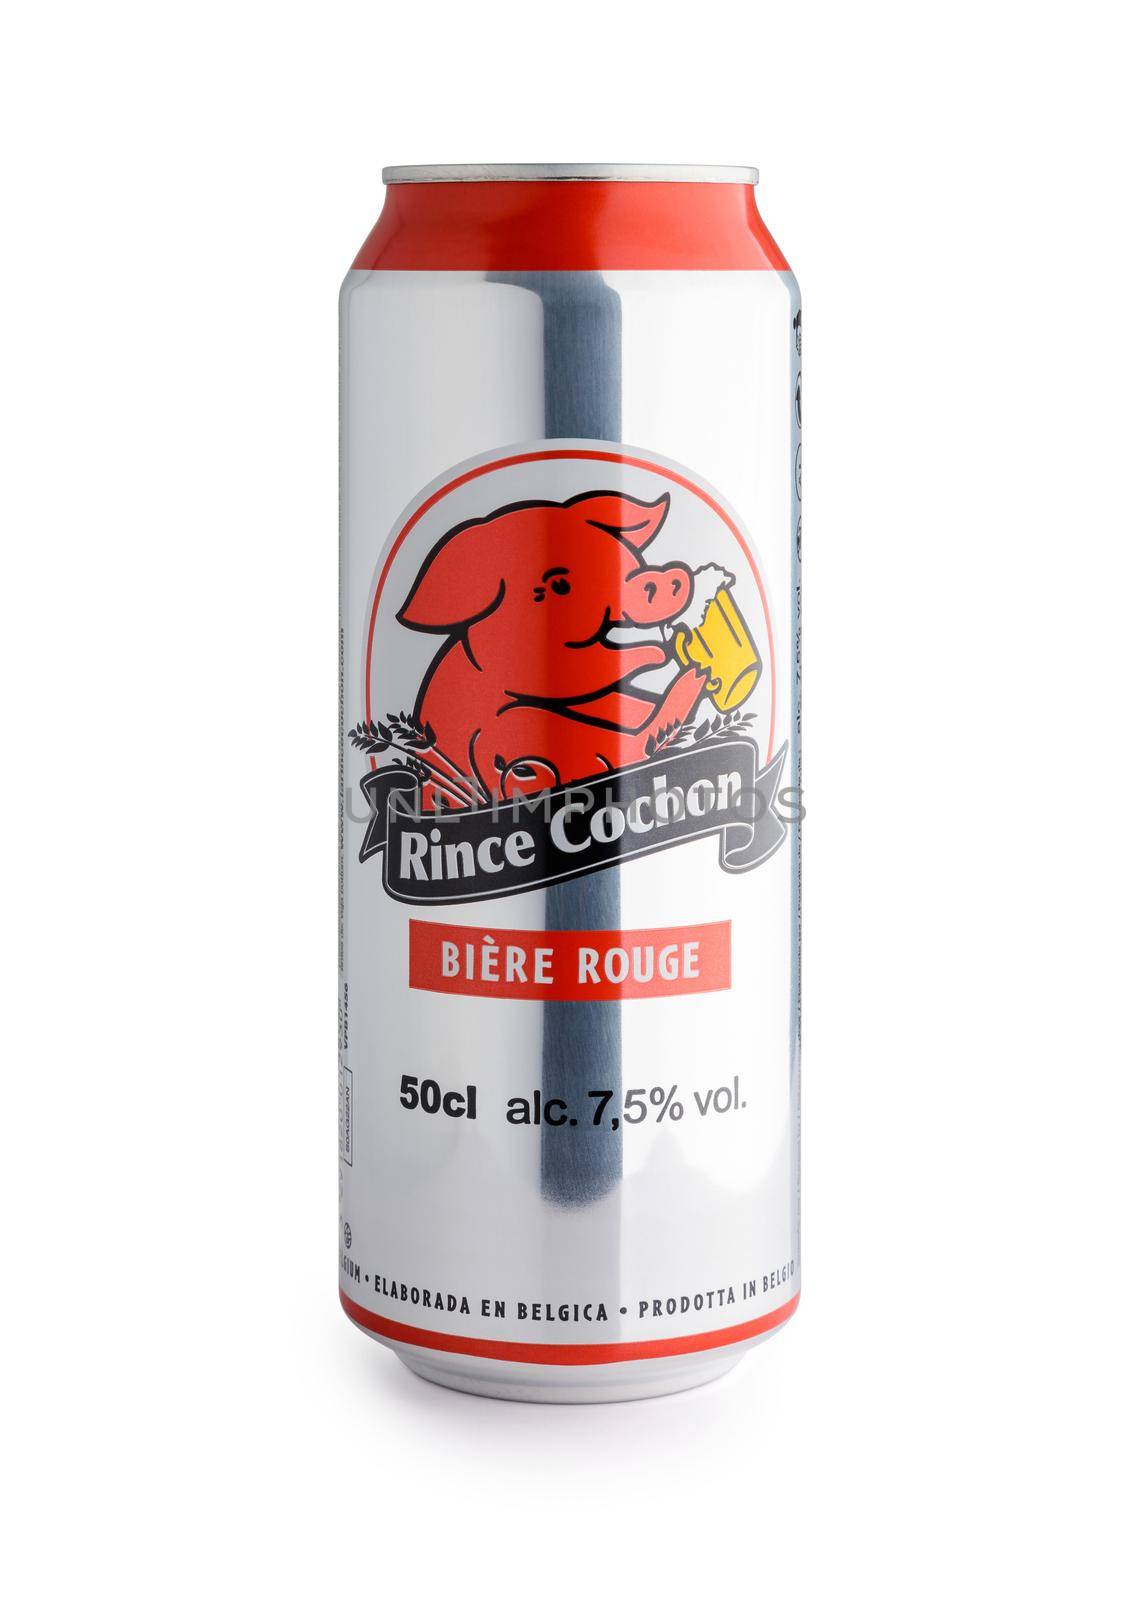 Red Rince Cochon beer can on white background by dutourdumonde